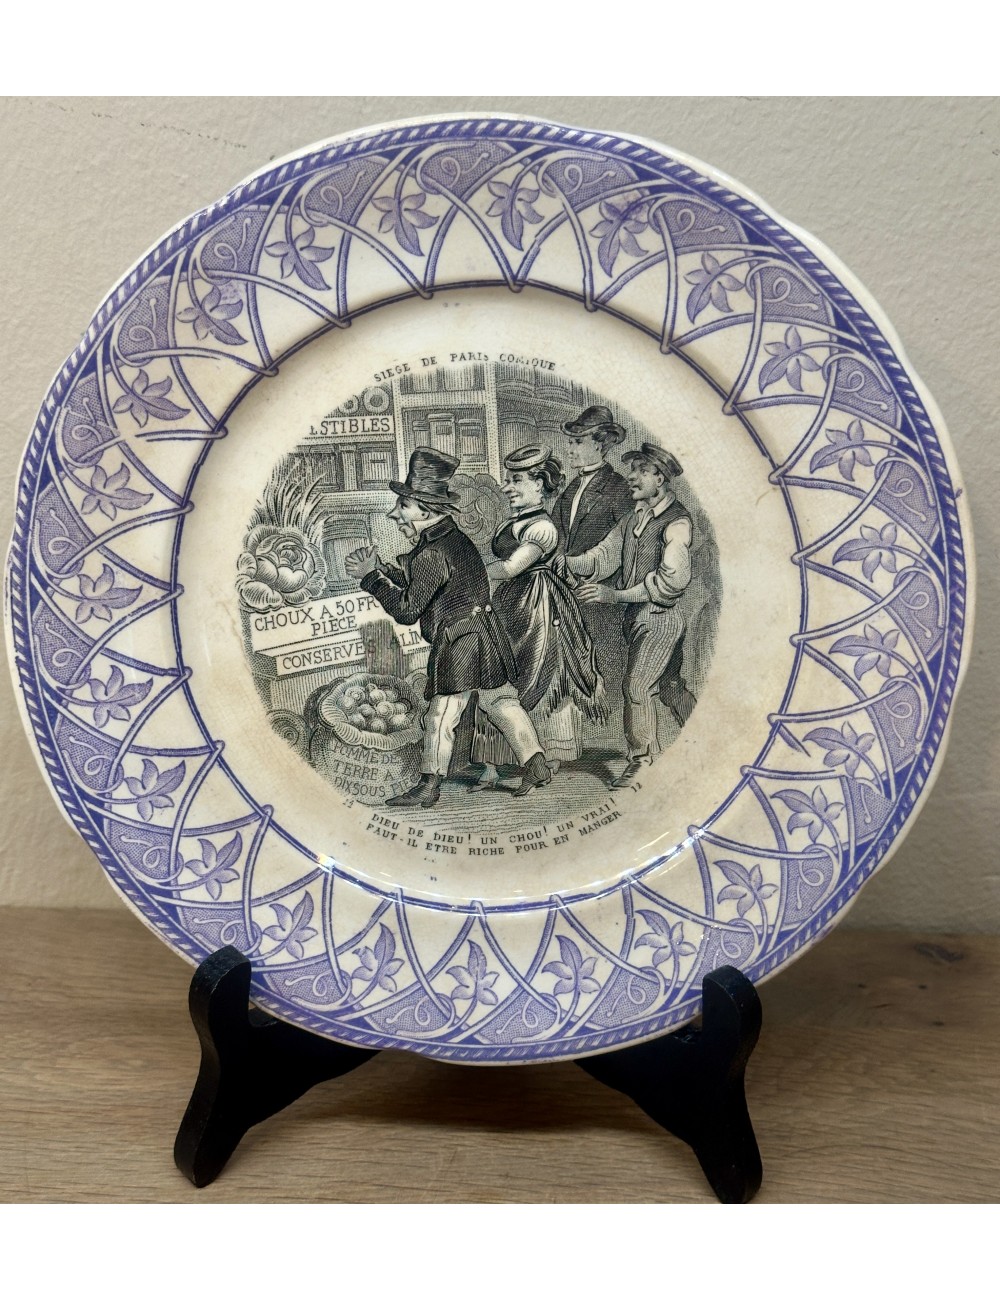 Plate / Decorative plate / Assiete parlante - Opaques de Sarreguemines - décor with image in black and white